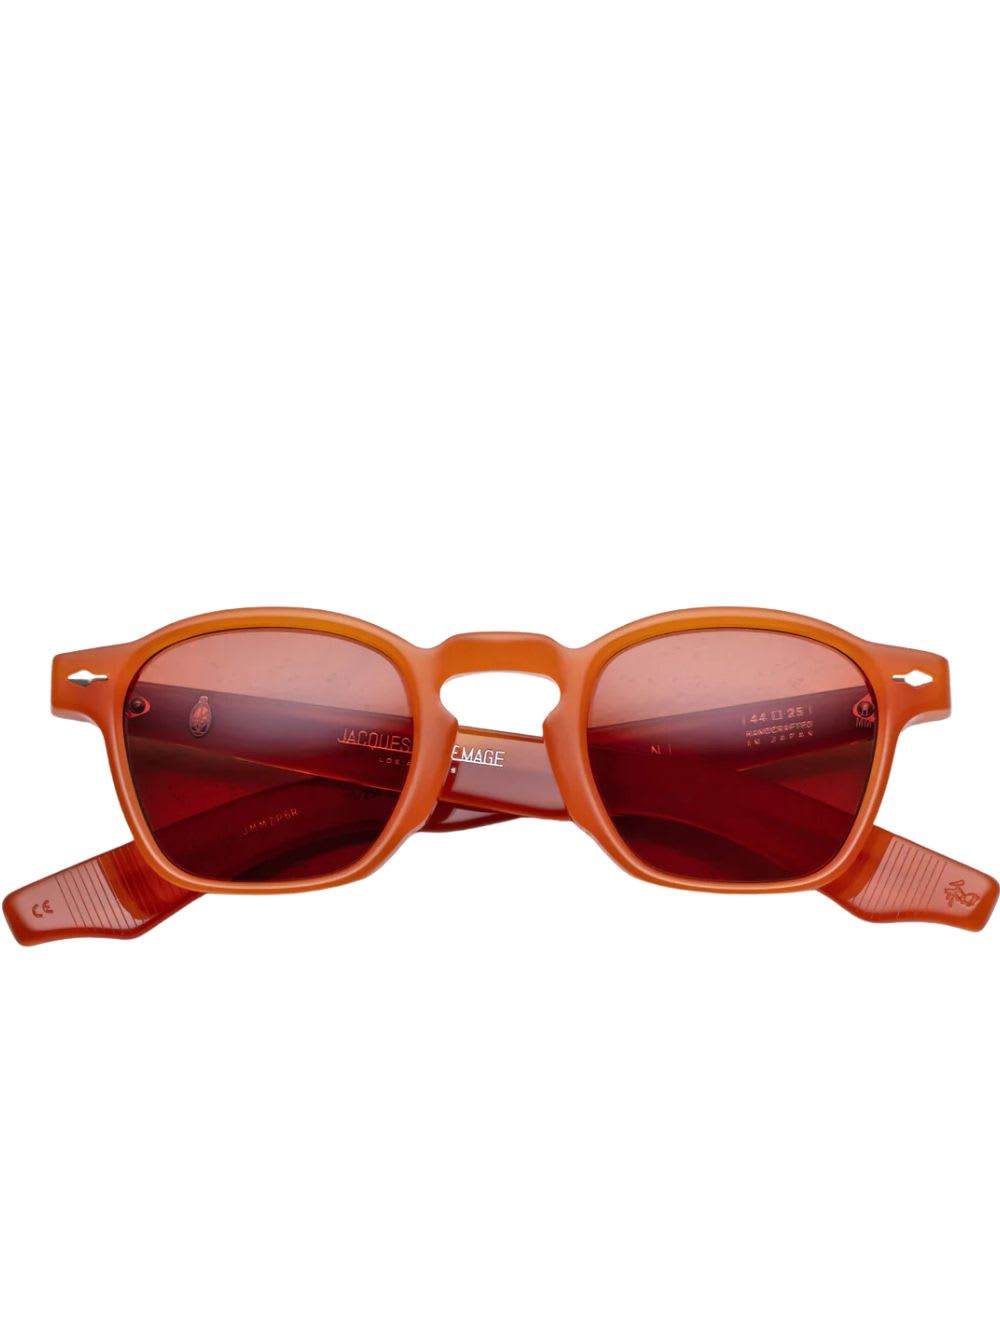 Jacques Marie Mage Zephirin Sunglasses In Pink